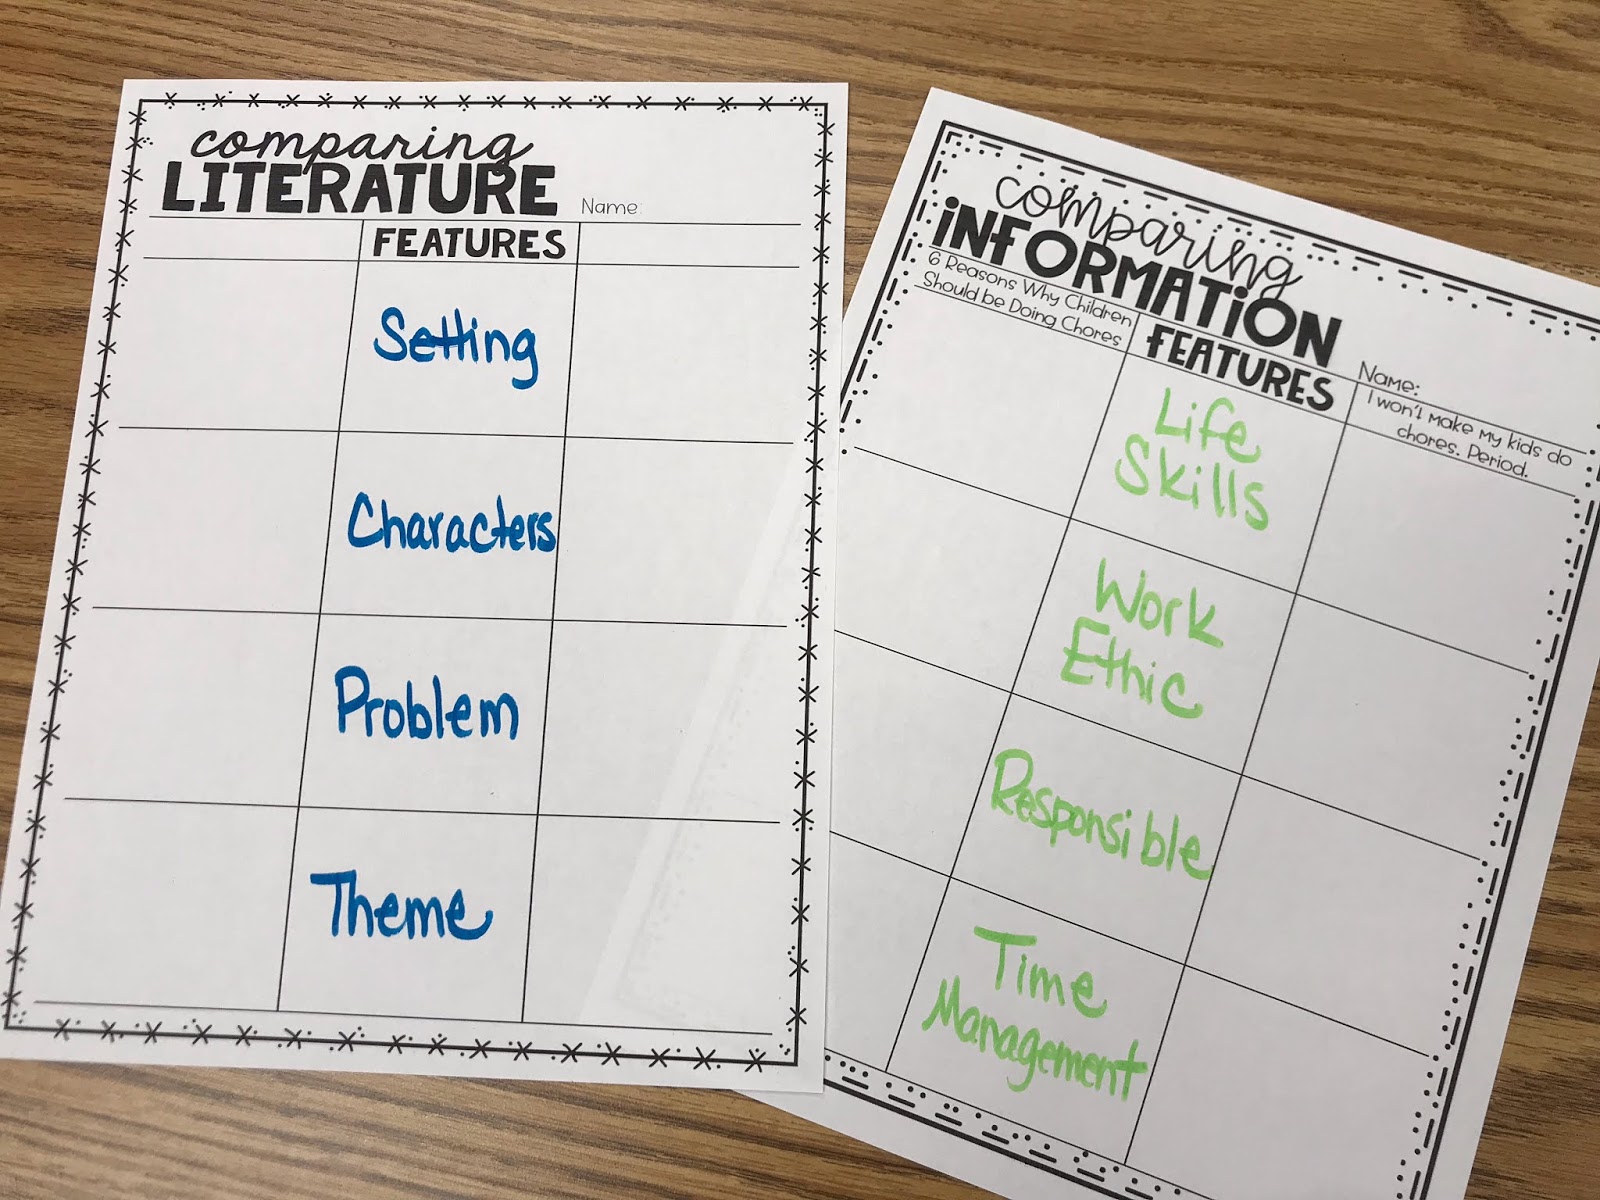 Comparing Literature organizer with text "Setting, Characters, Problem, Theme" Comparing Information organizer with text "Life Skills, Work Ethic, Responsible, Time Management"